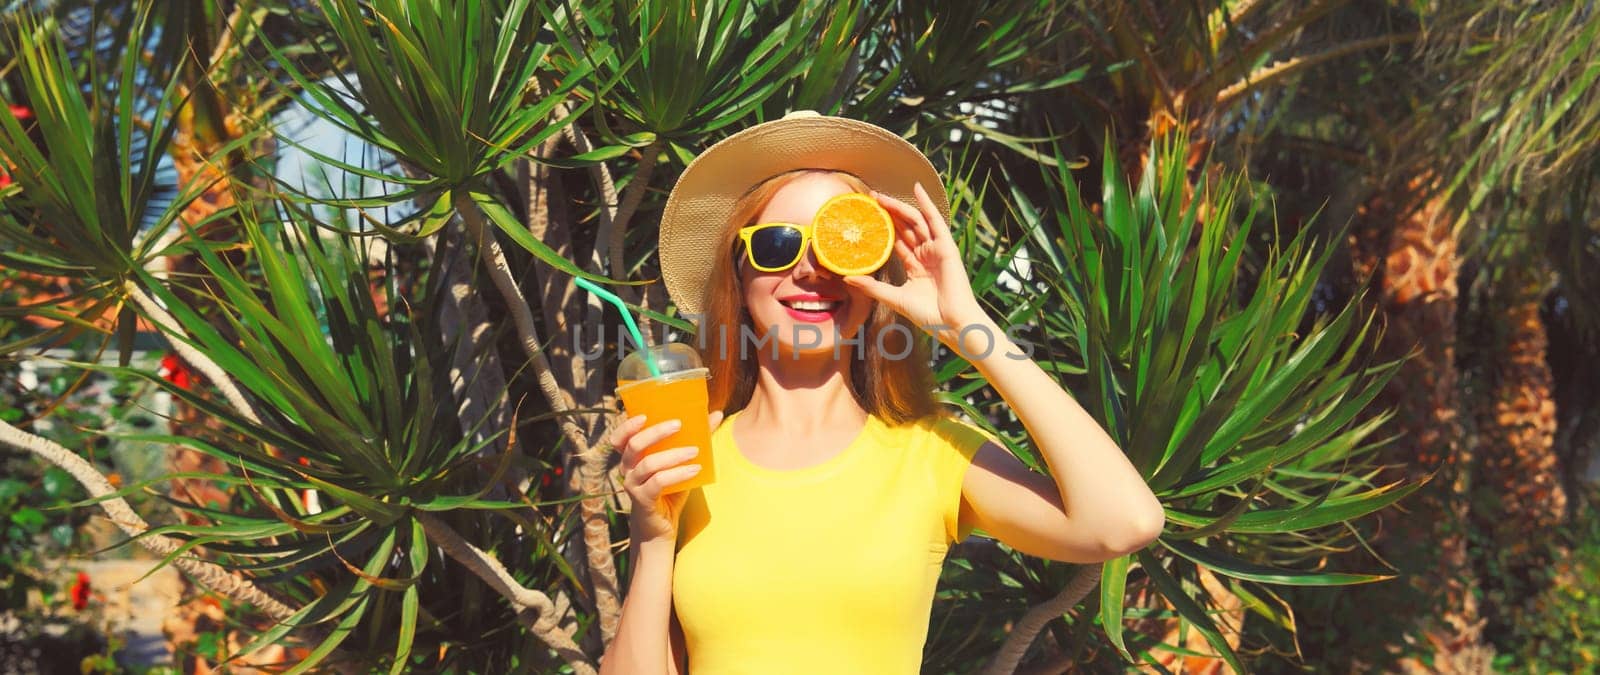 Summer portrait of happy smiling young woman drinking fresh juice with slice of orange fruit wearing straw hat on the beach with palm tree background